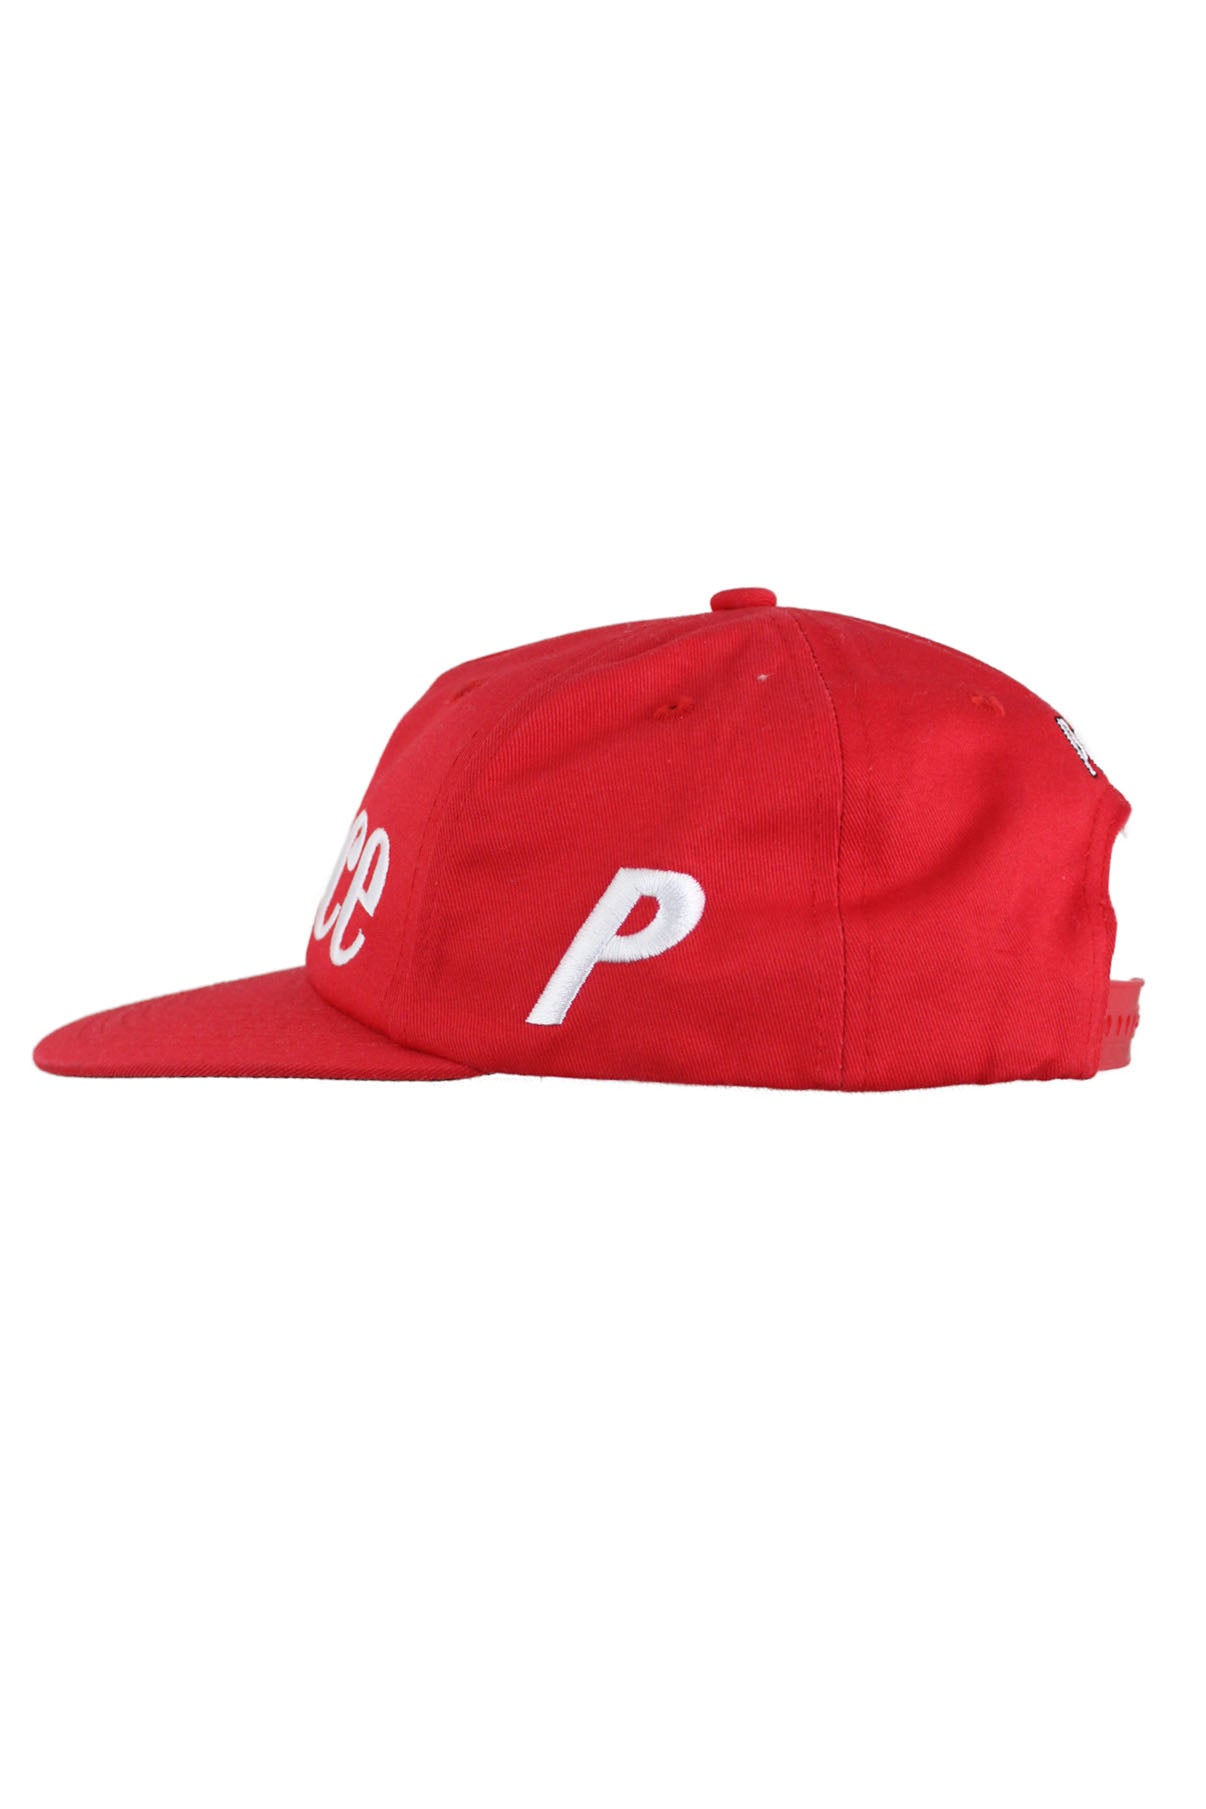 profile view the 'p' logo embroidered at left side of hat.